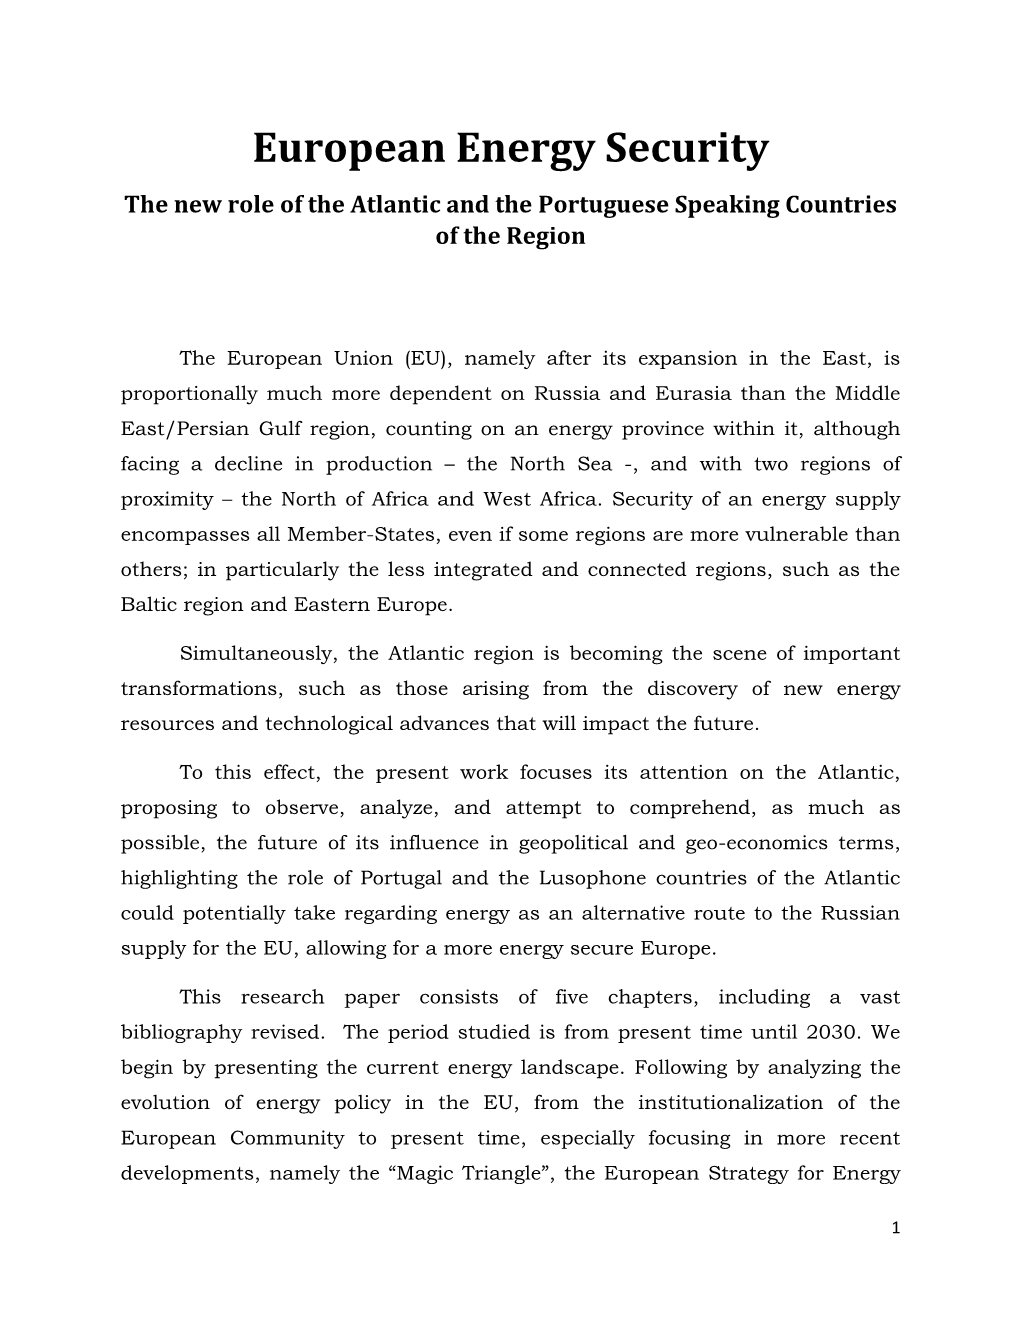 European Energy Security the New Role of the Atlantic and the Portuguese Speaking Countries of the Region